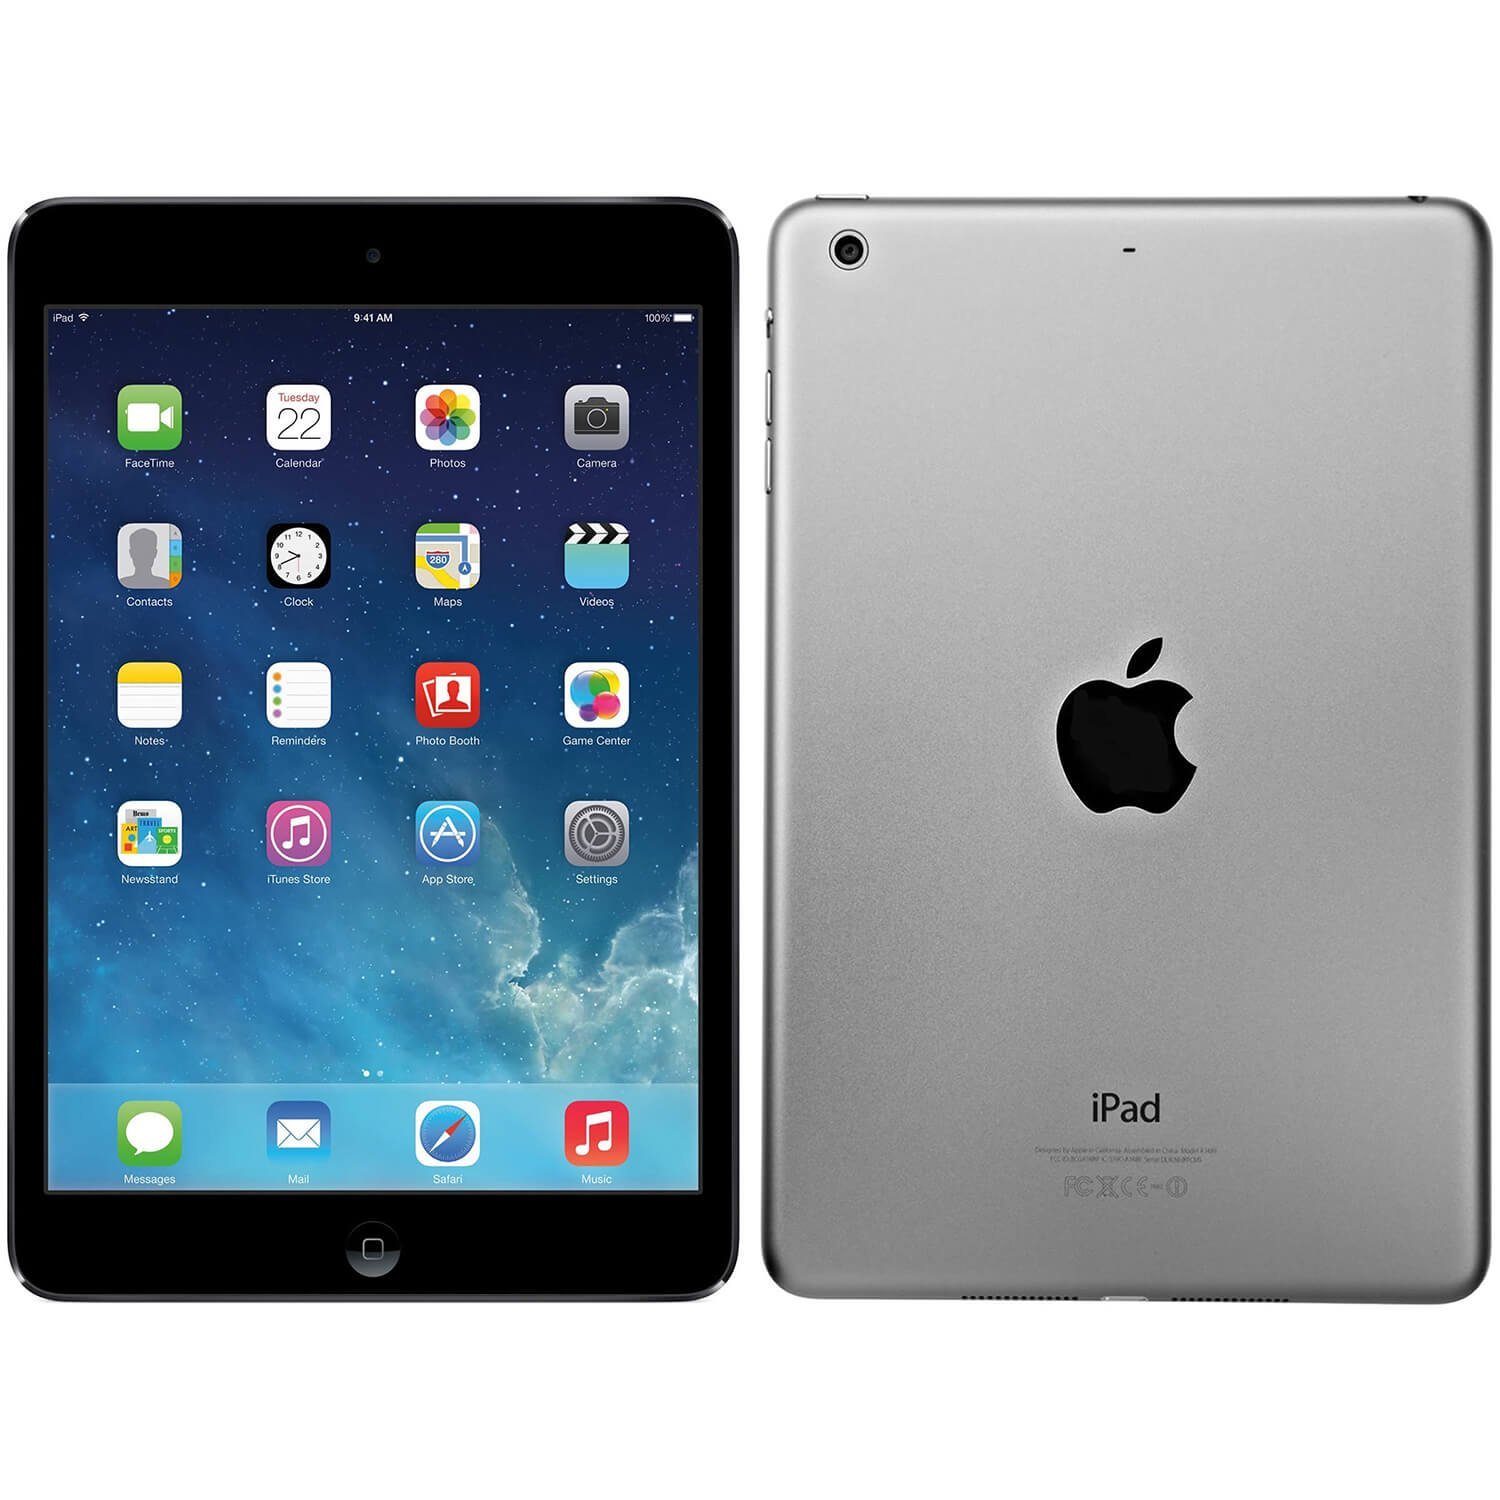 Restored Apple iPad Air [1st Generation] 16GB WiFi Only Space Gray (Refurbished) - image 1 of 5